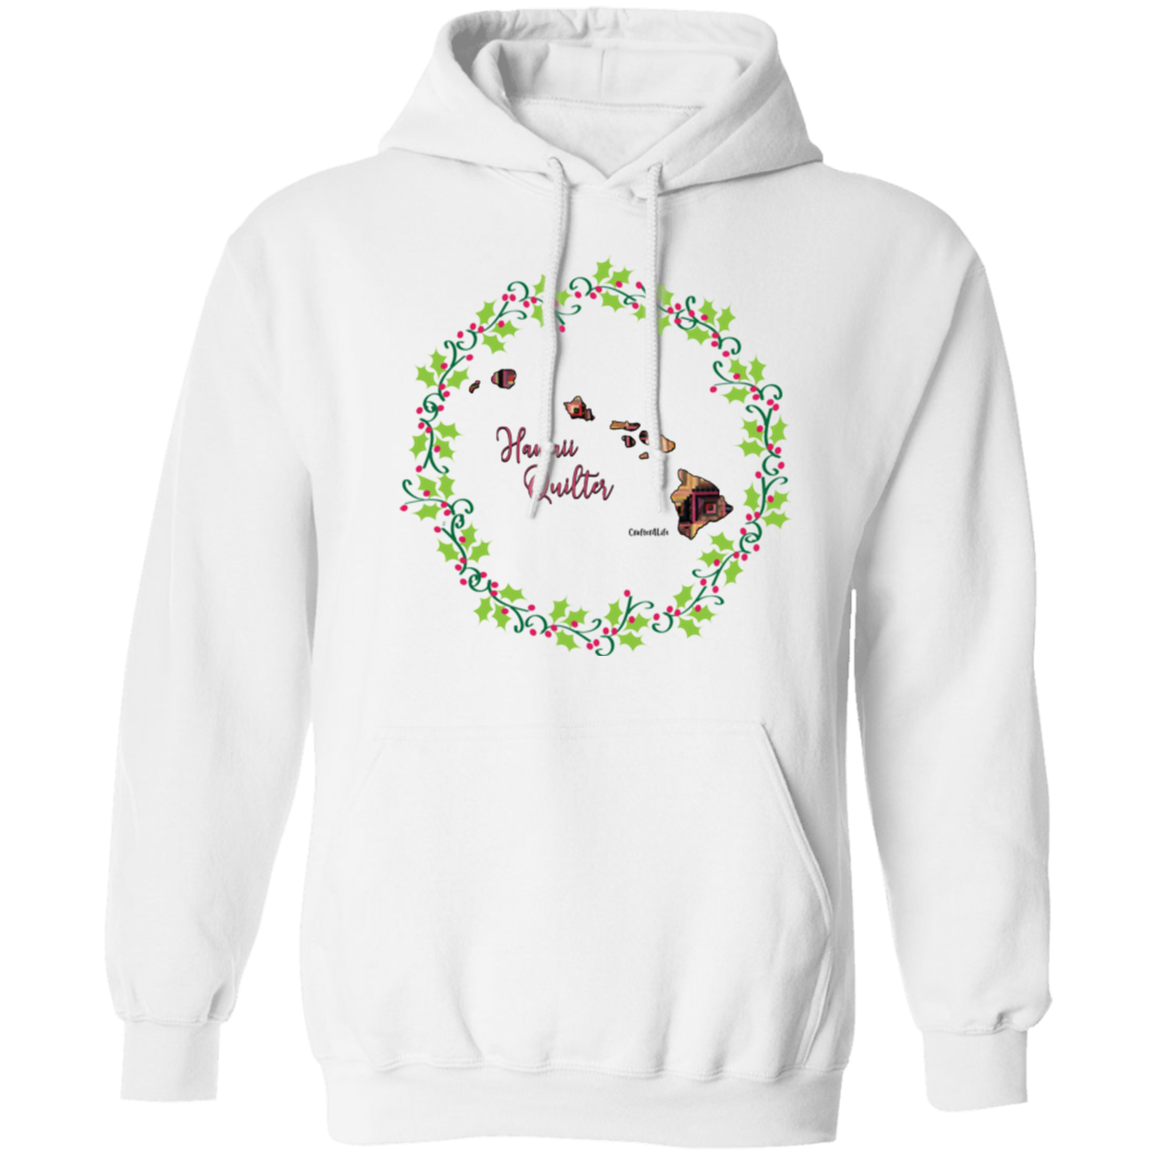 Hawaii Quilter Christmas Pullover Hoodie